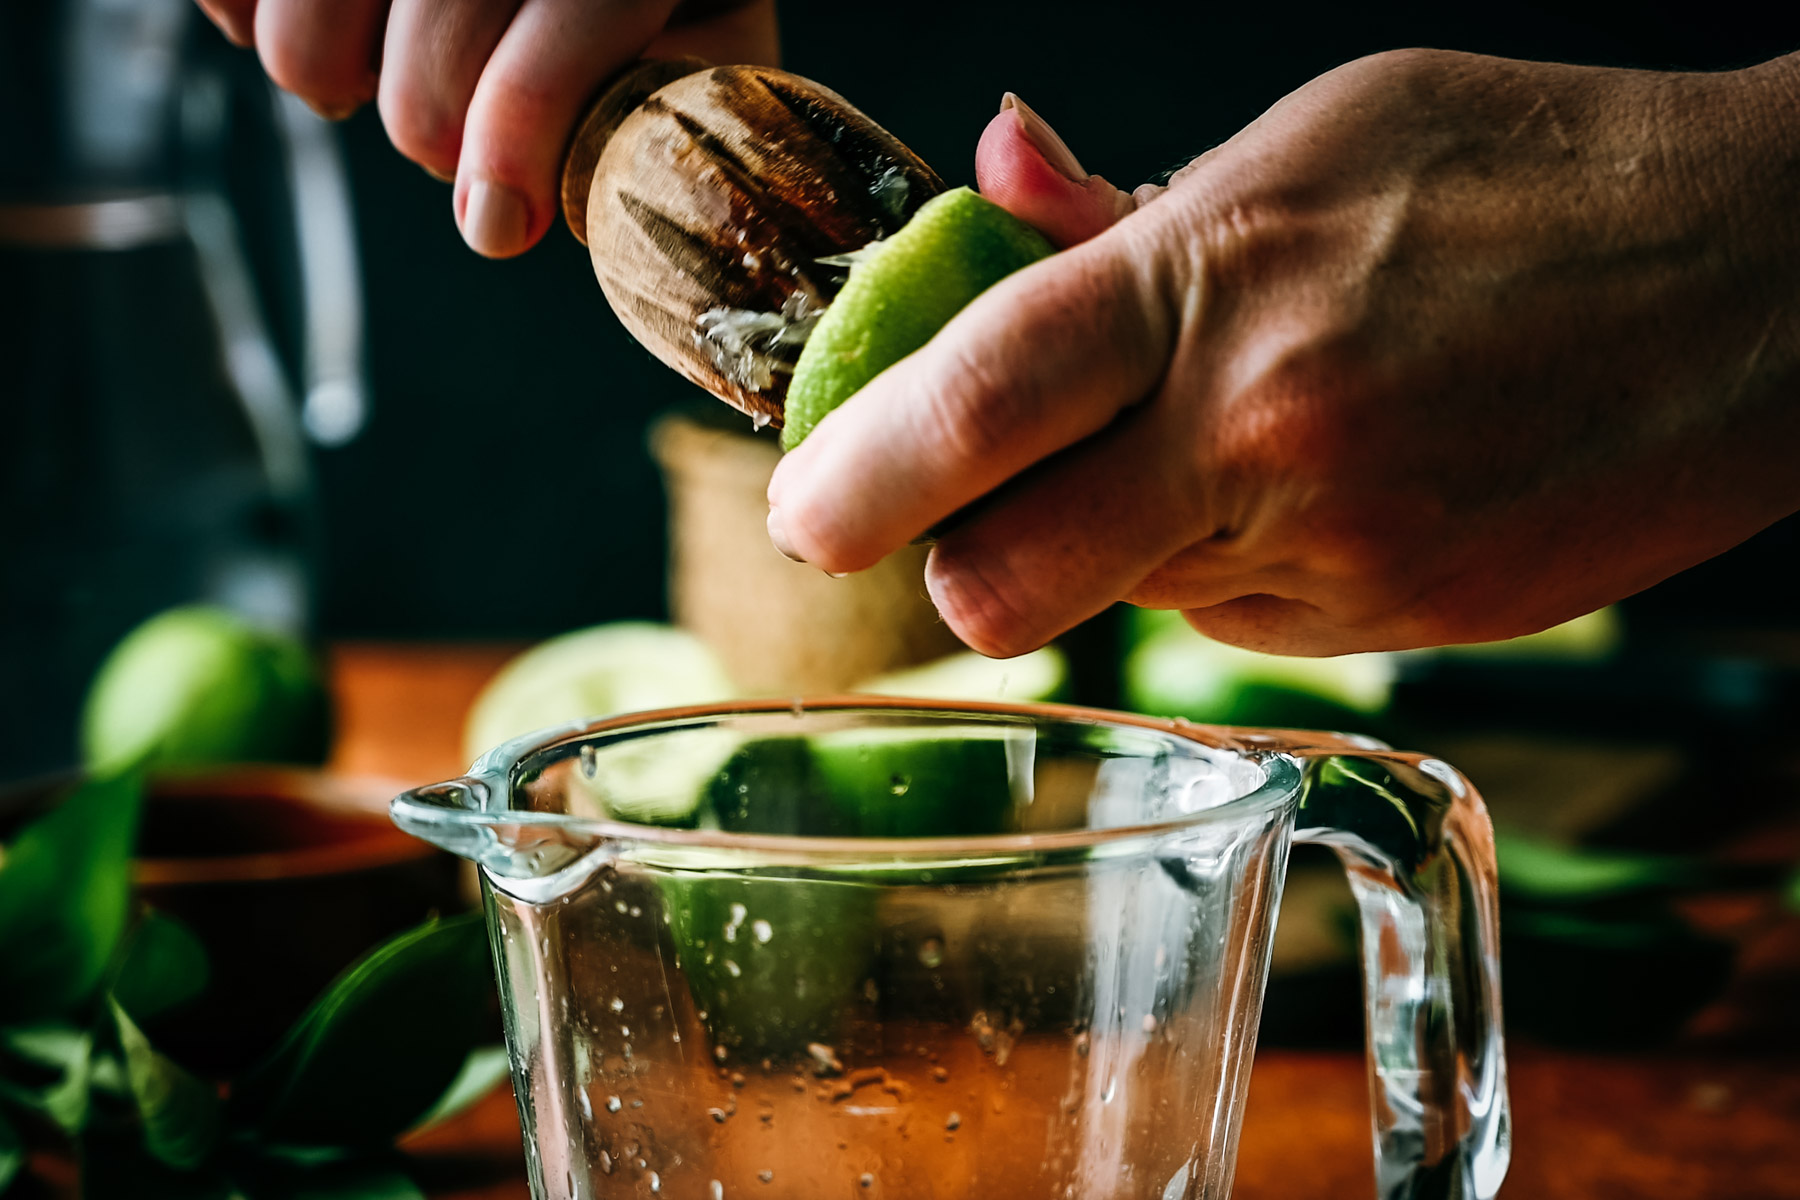 Hands squeezing lime juice into a glass pitcher using a wooden citrus reamer, with fresh limes scattered around.